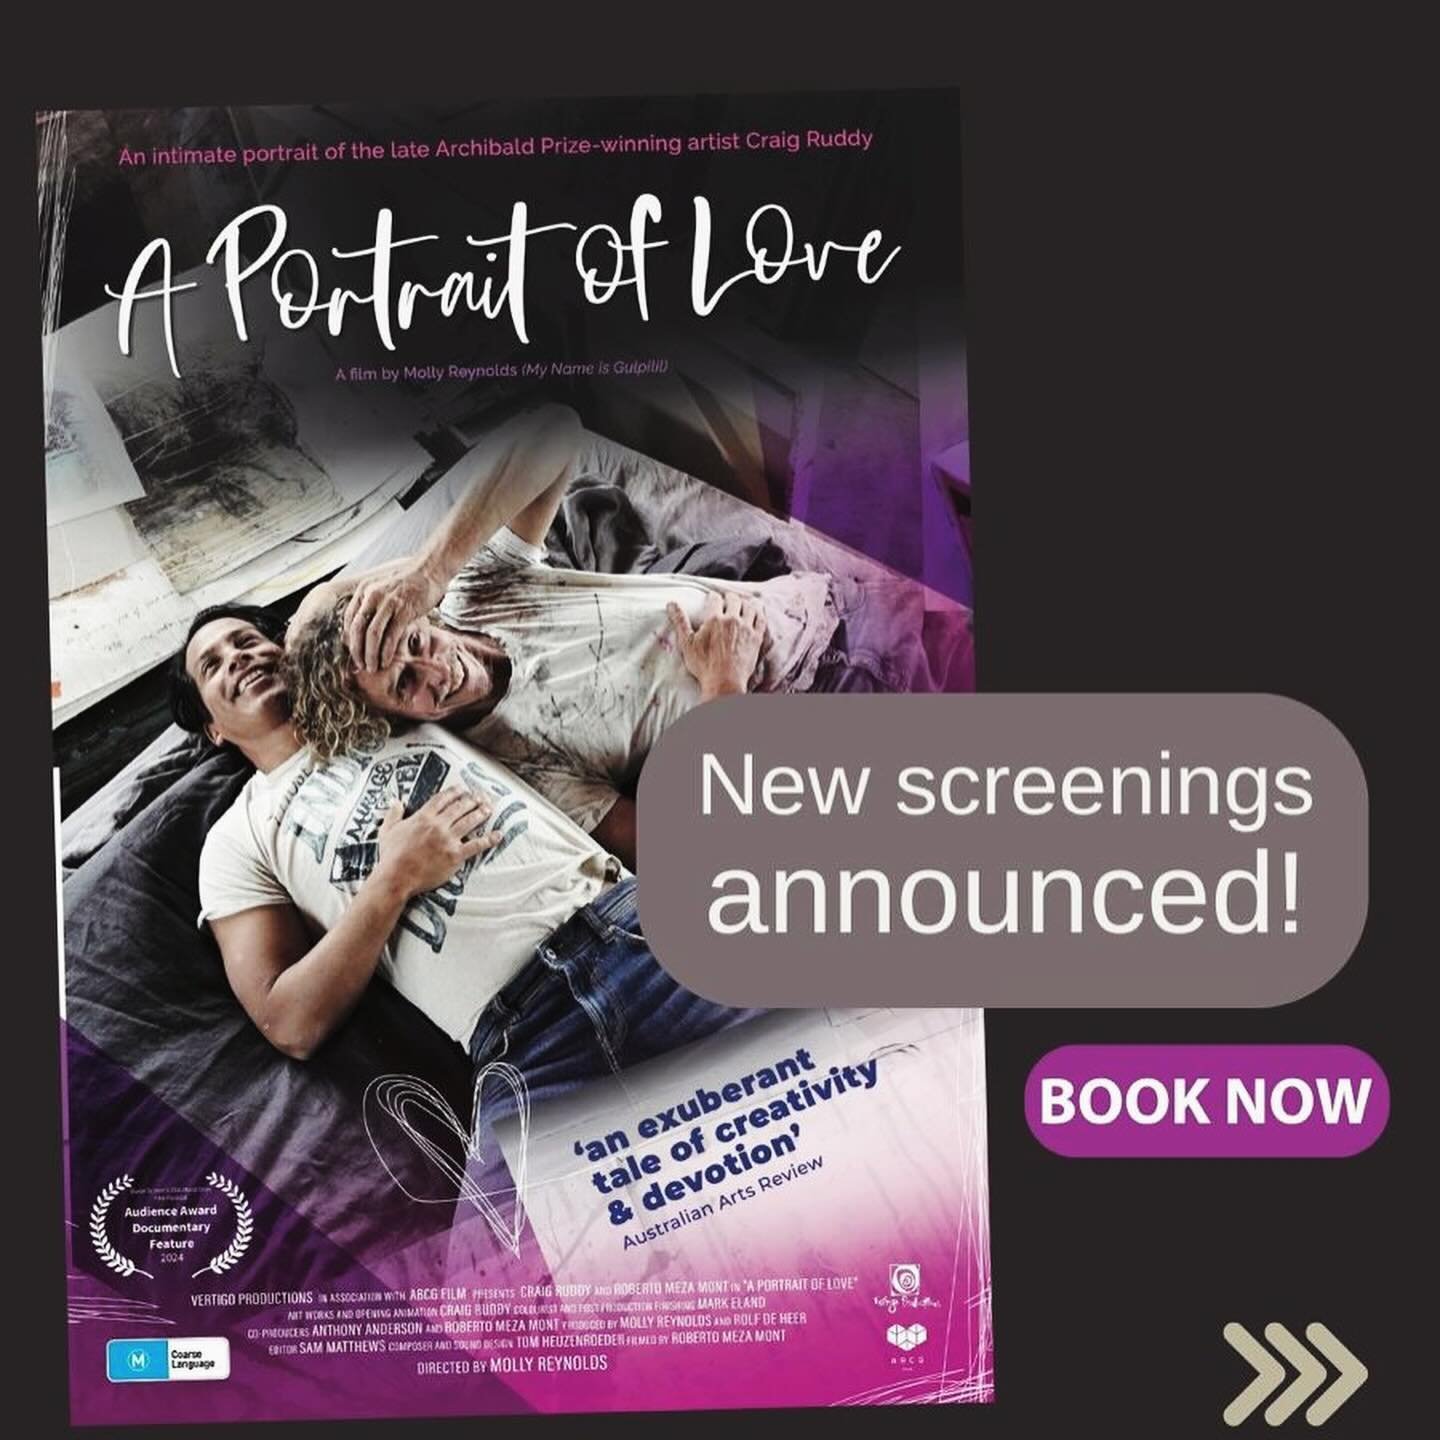 Exciting news! New screenings for &ldquo;A Portrait of Love&rdquo; have been scheduled. These exclusive events will include a special Q&amp;A with the acclaimed Molly Reynolds and Roberto Meza Mont, Craig&rsquo;s partner and co-star. Swipe through fo